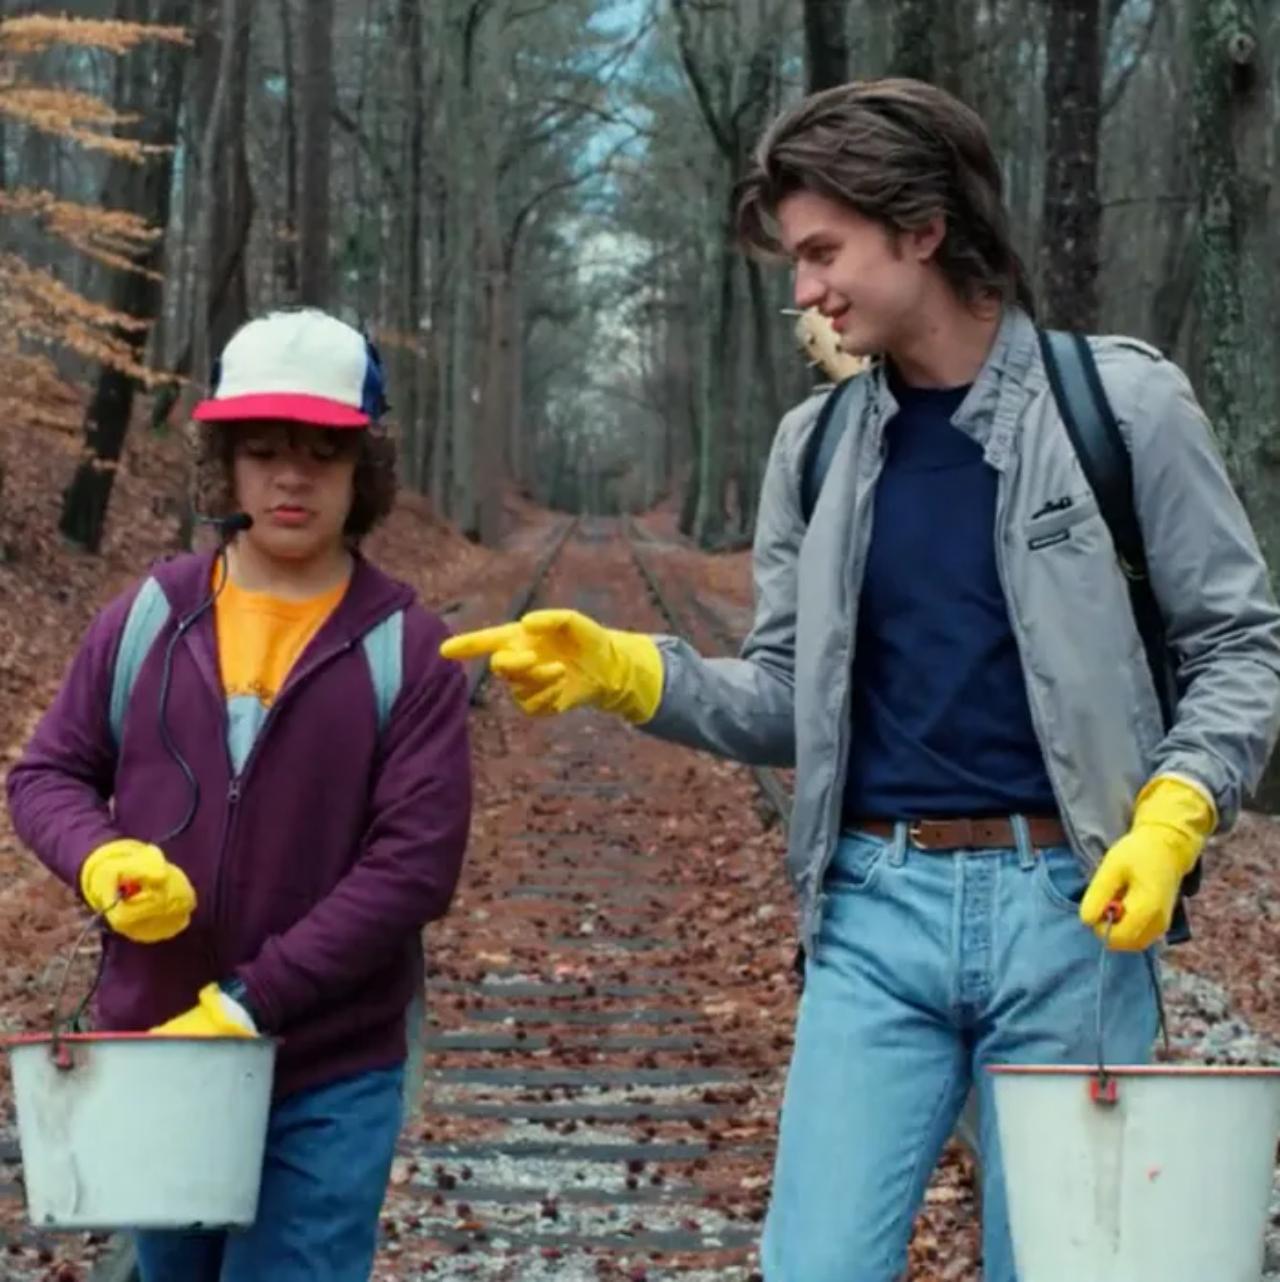 Steve Harrington and Dustin Henderson in Stranger Things
At the Wheelers' house, a chance encounter brought together the endearing Demogorgon-fighting buddies, who teamed up to capture Dart and battle demo-dogs. During this adventure, Dustin supported Steve through his breakup with Nancy, and in return, Steve offered dating advice...and let's not forget the hairstyling tips